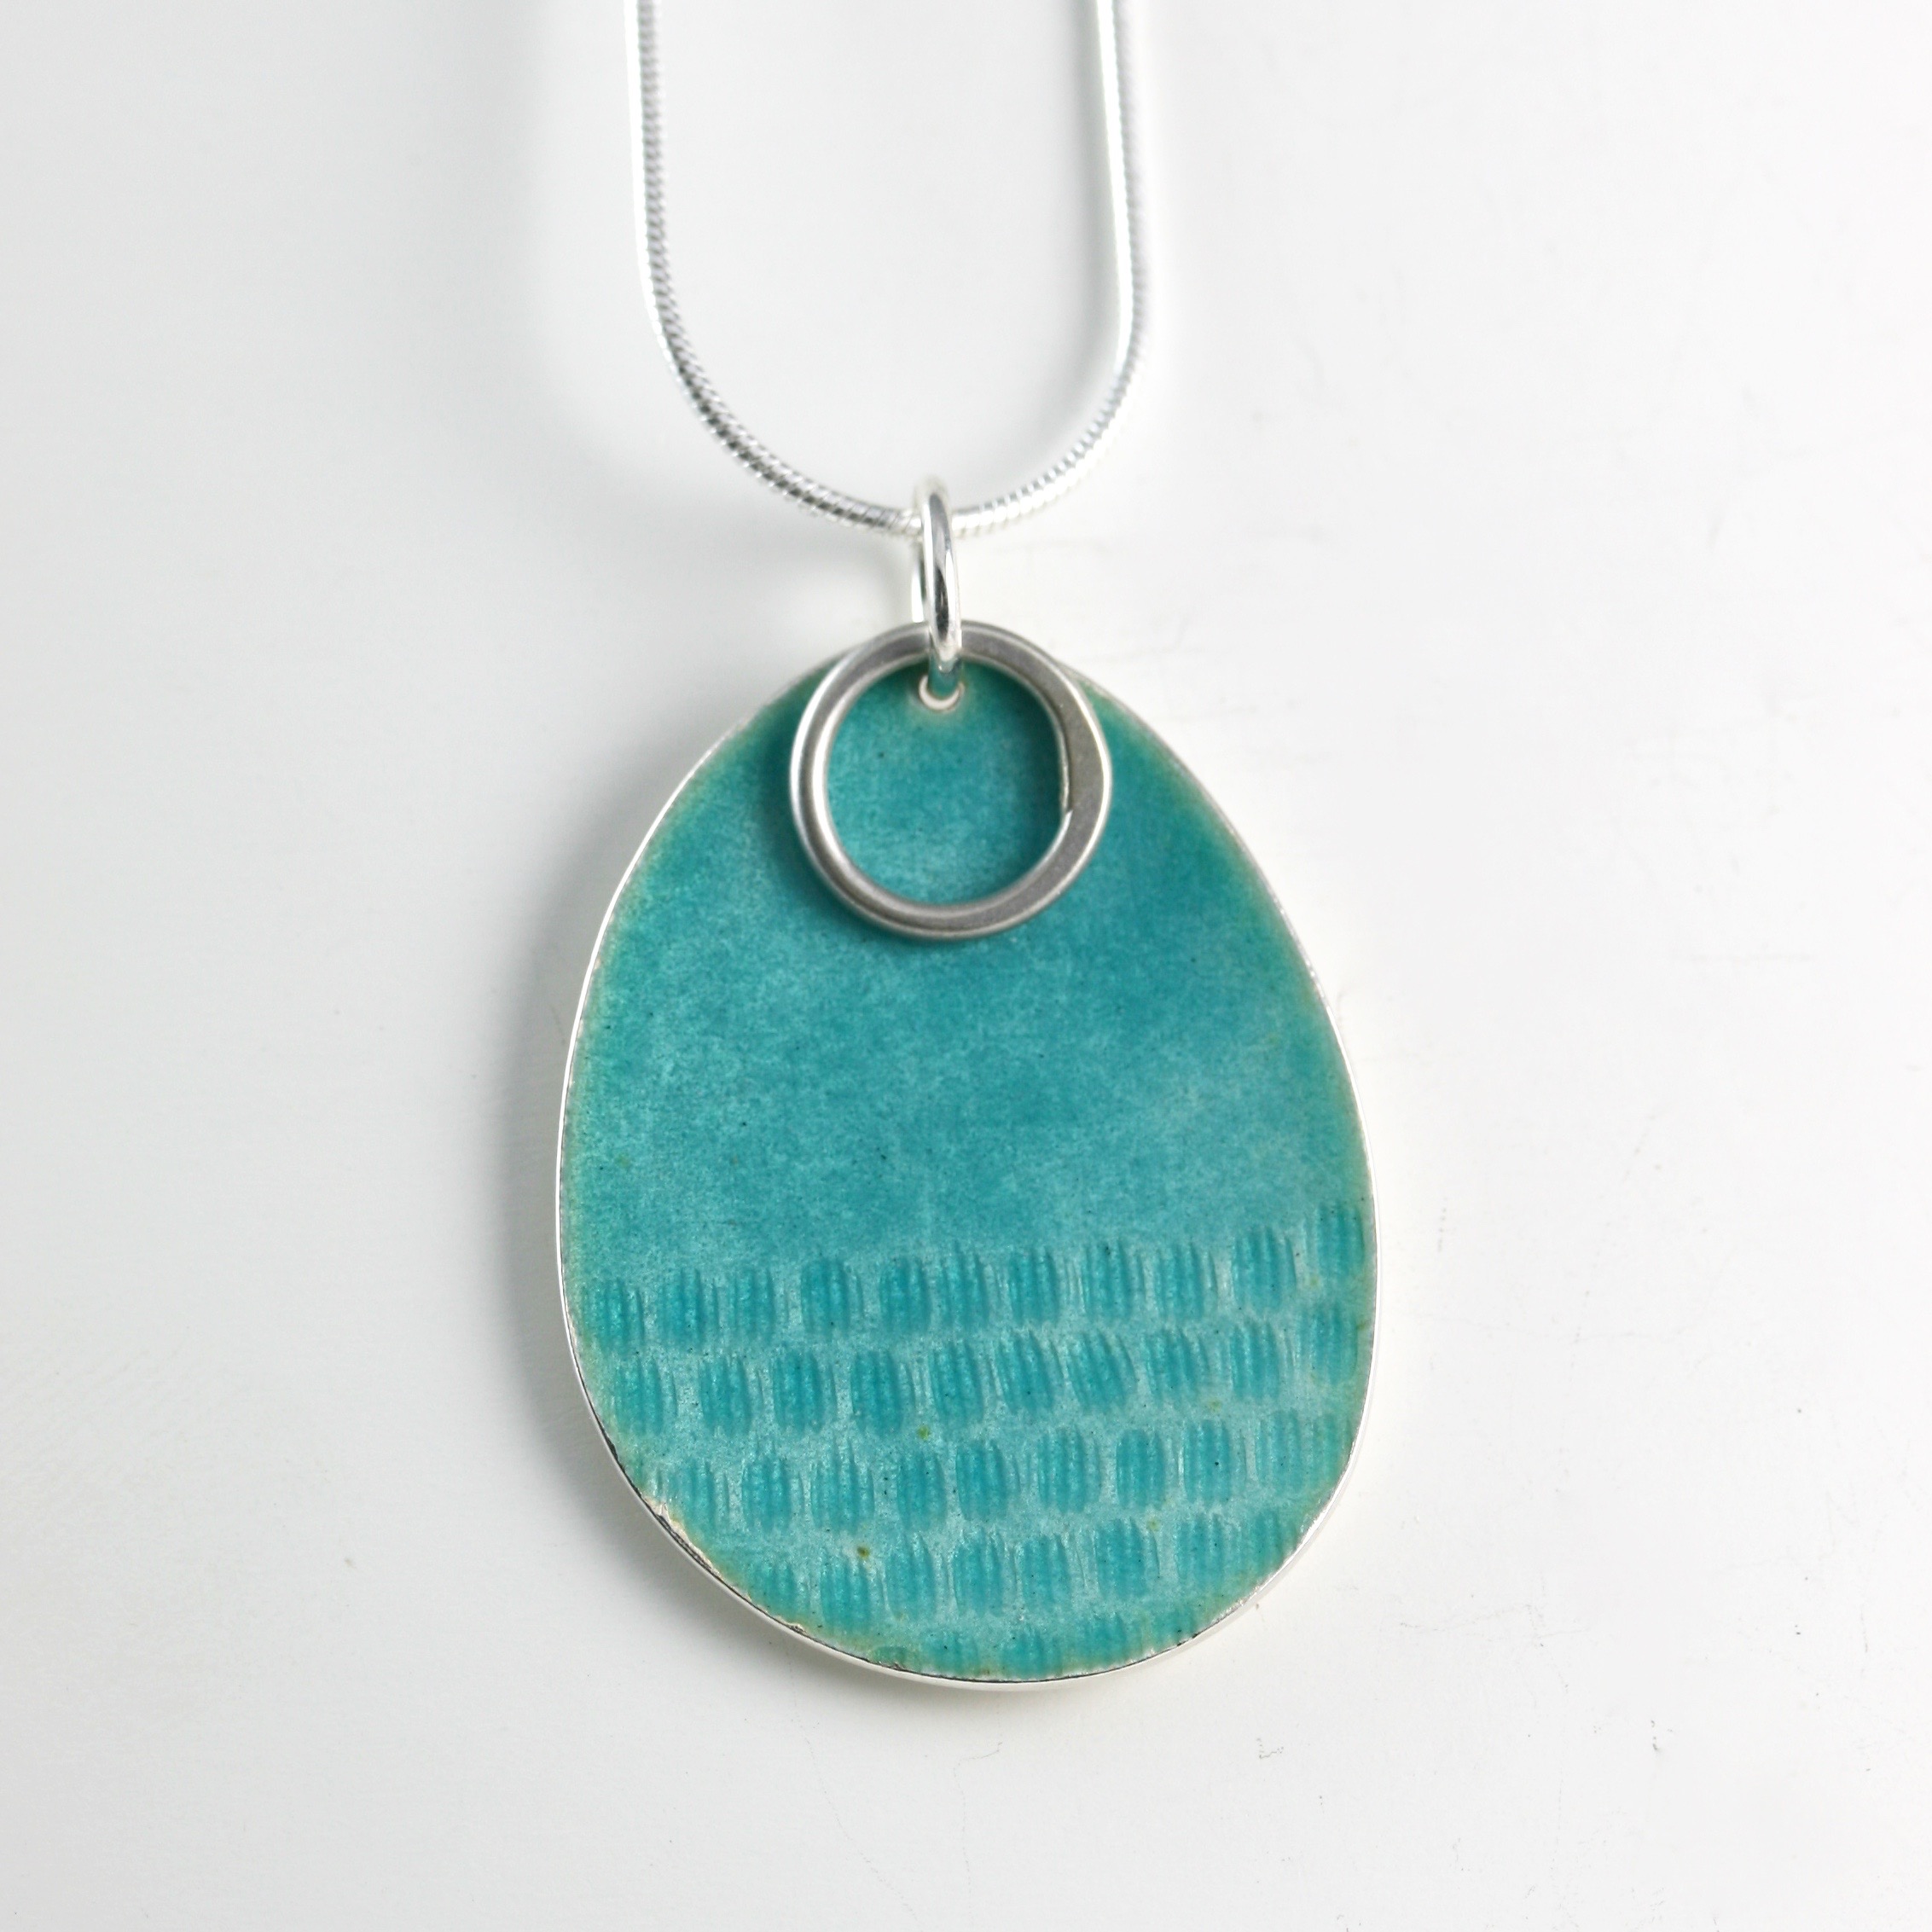 Pendant Tidal sereis in deep turquoise | Necklaces / Pendants by ...